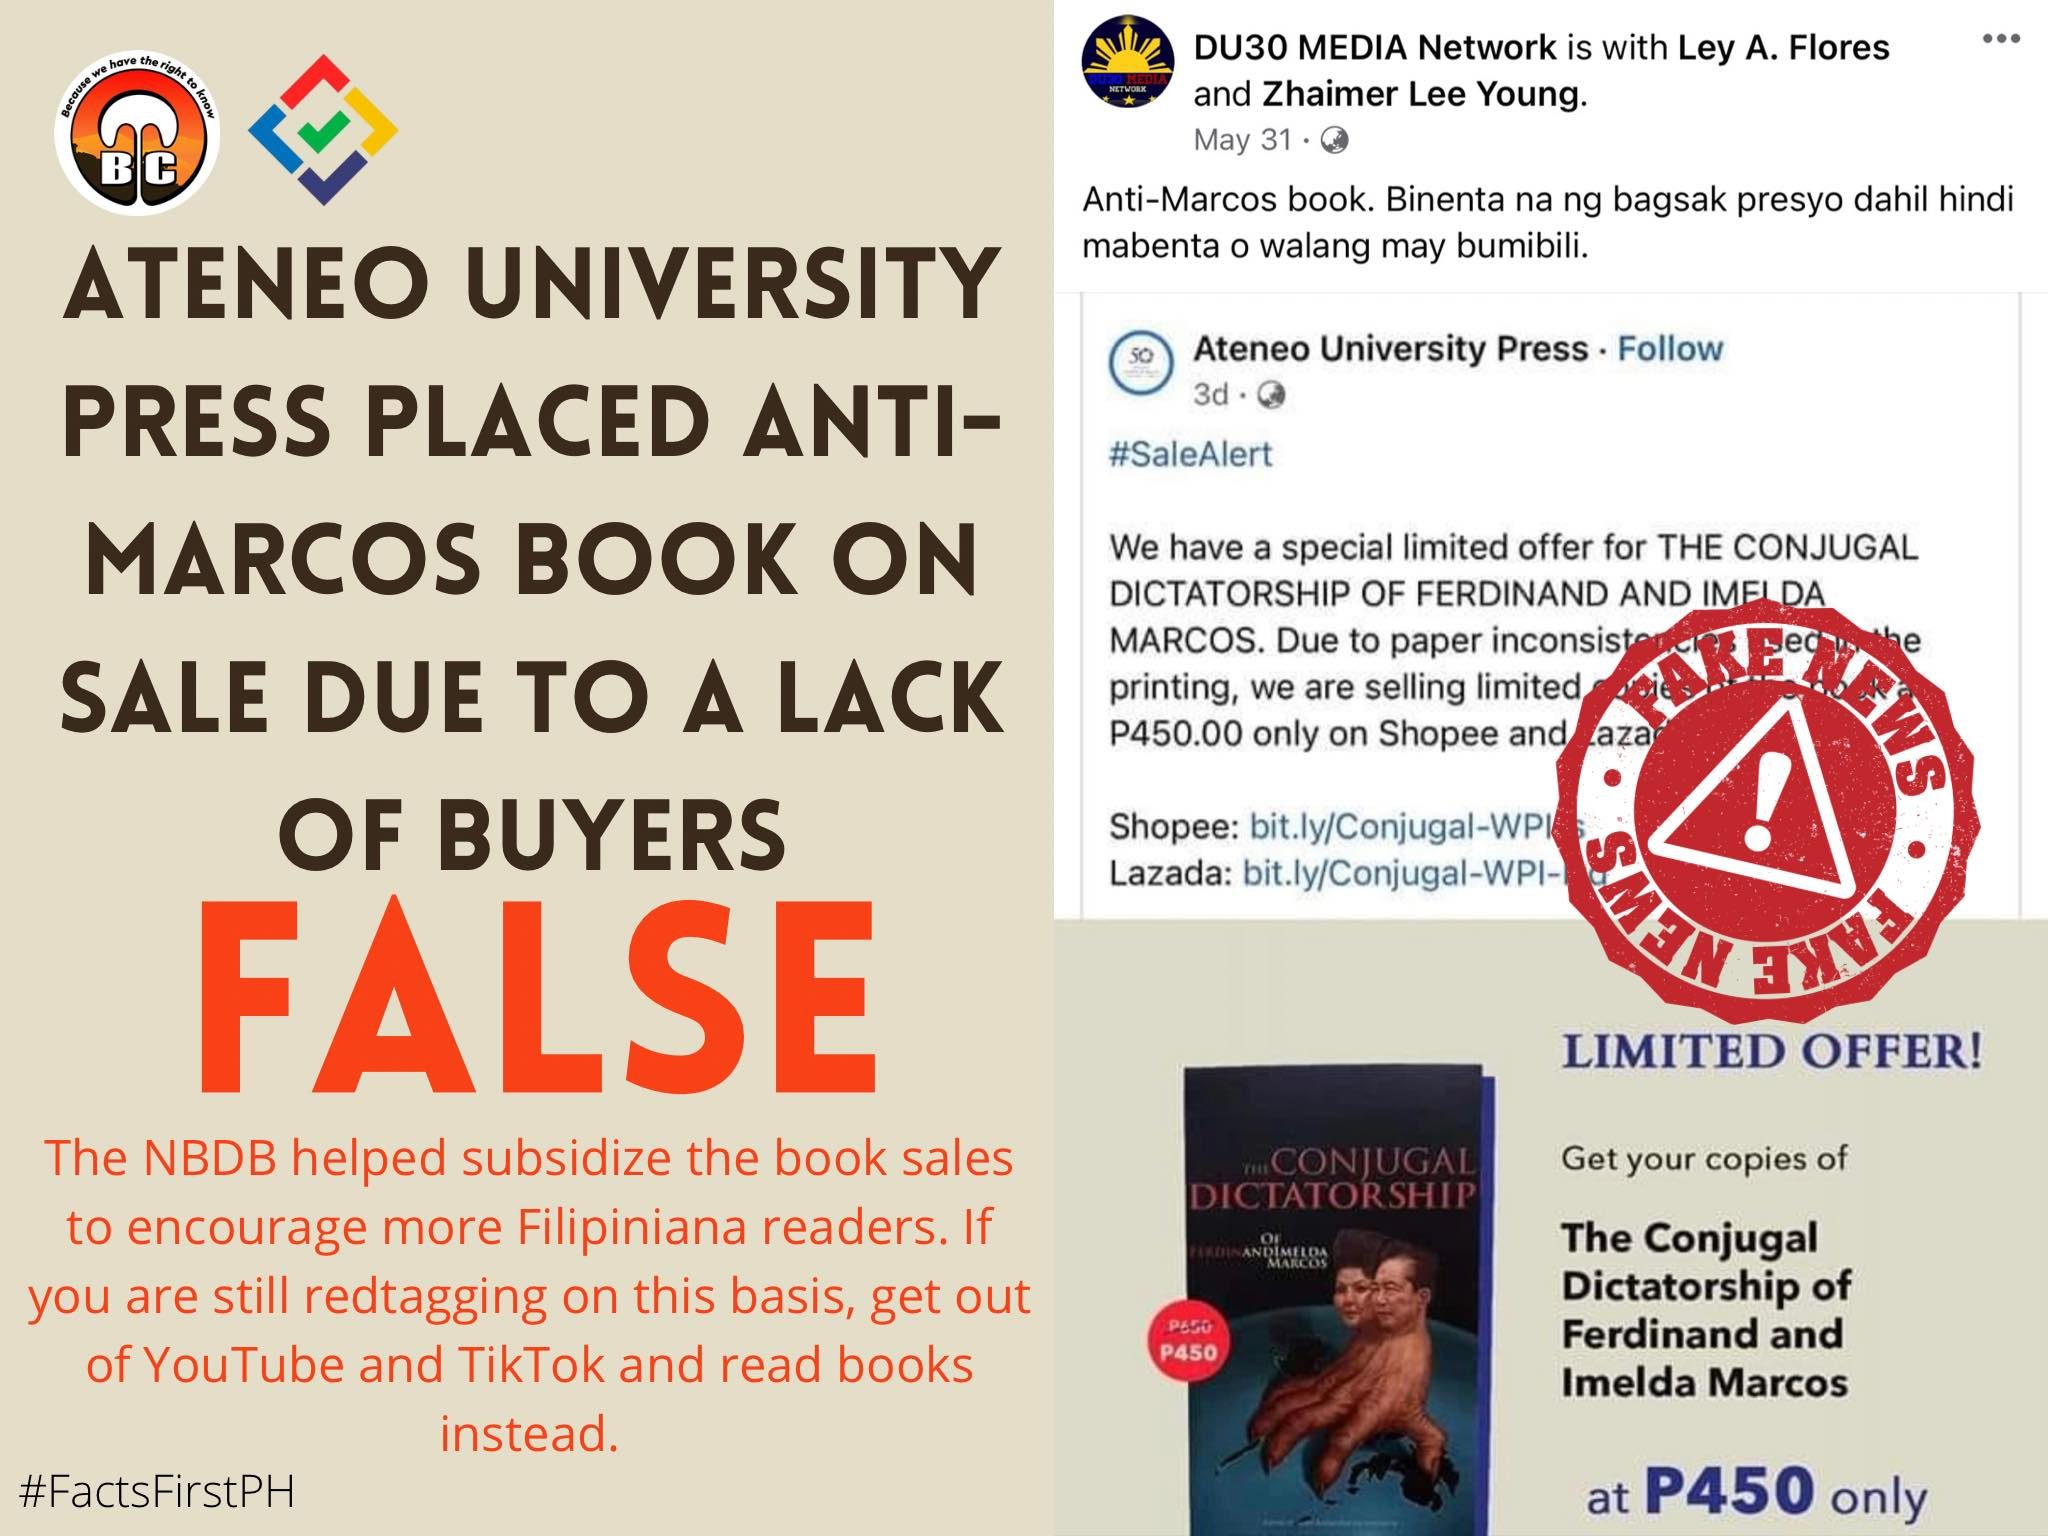 FACT CHECK: Ateneo University Press placed anti-Marcos book on sale due to a lack of buyers #FactsFirstPH